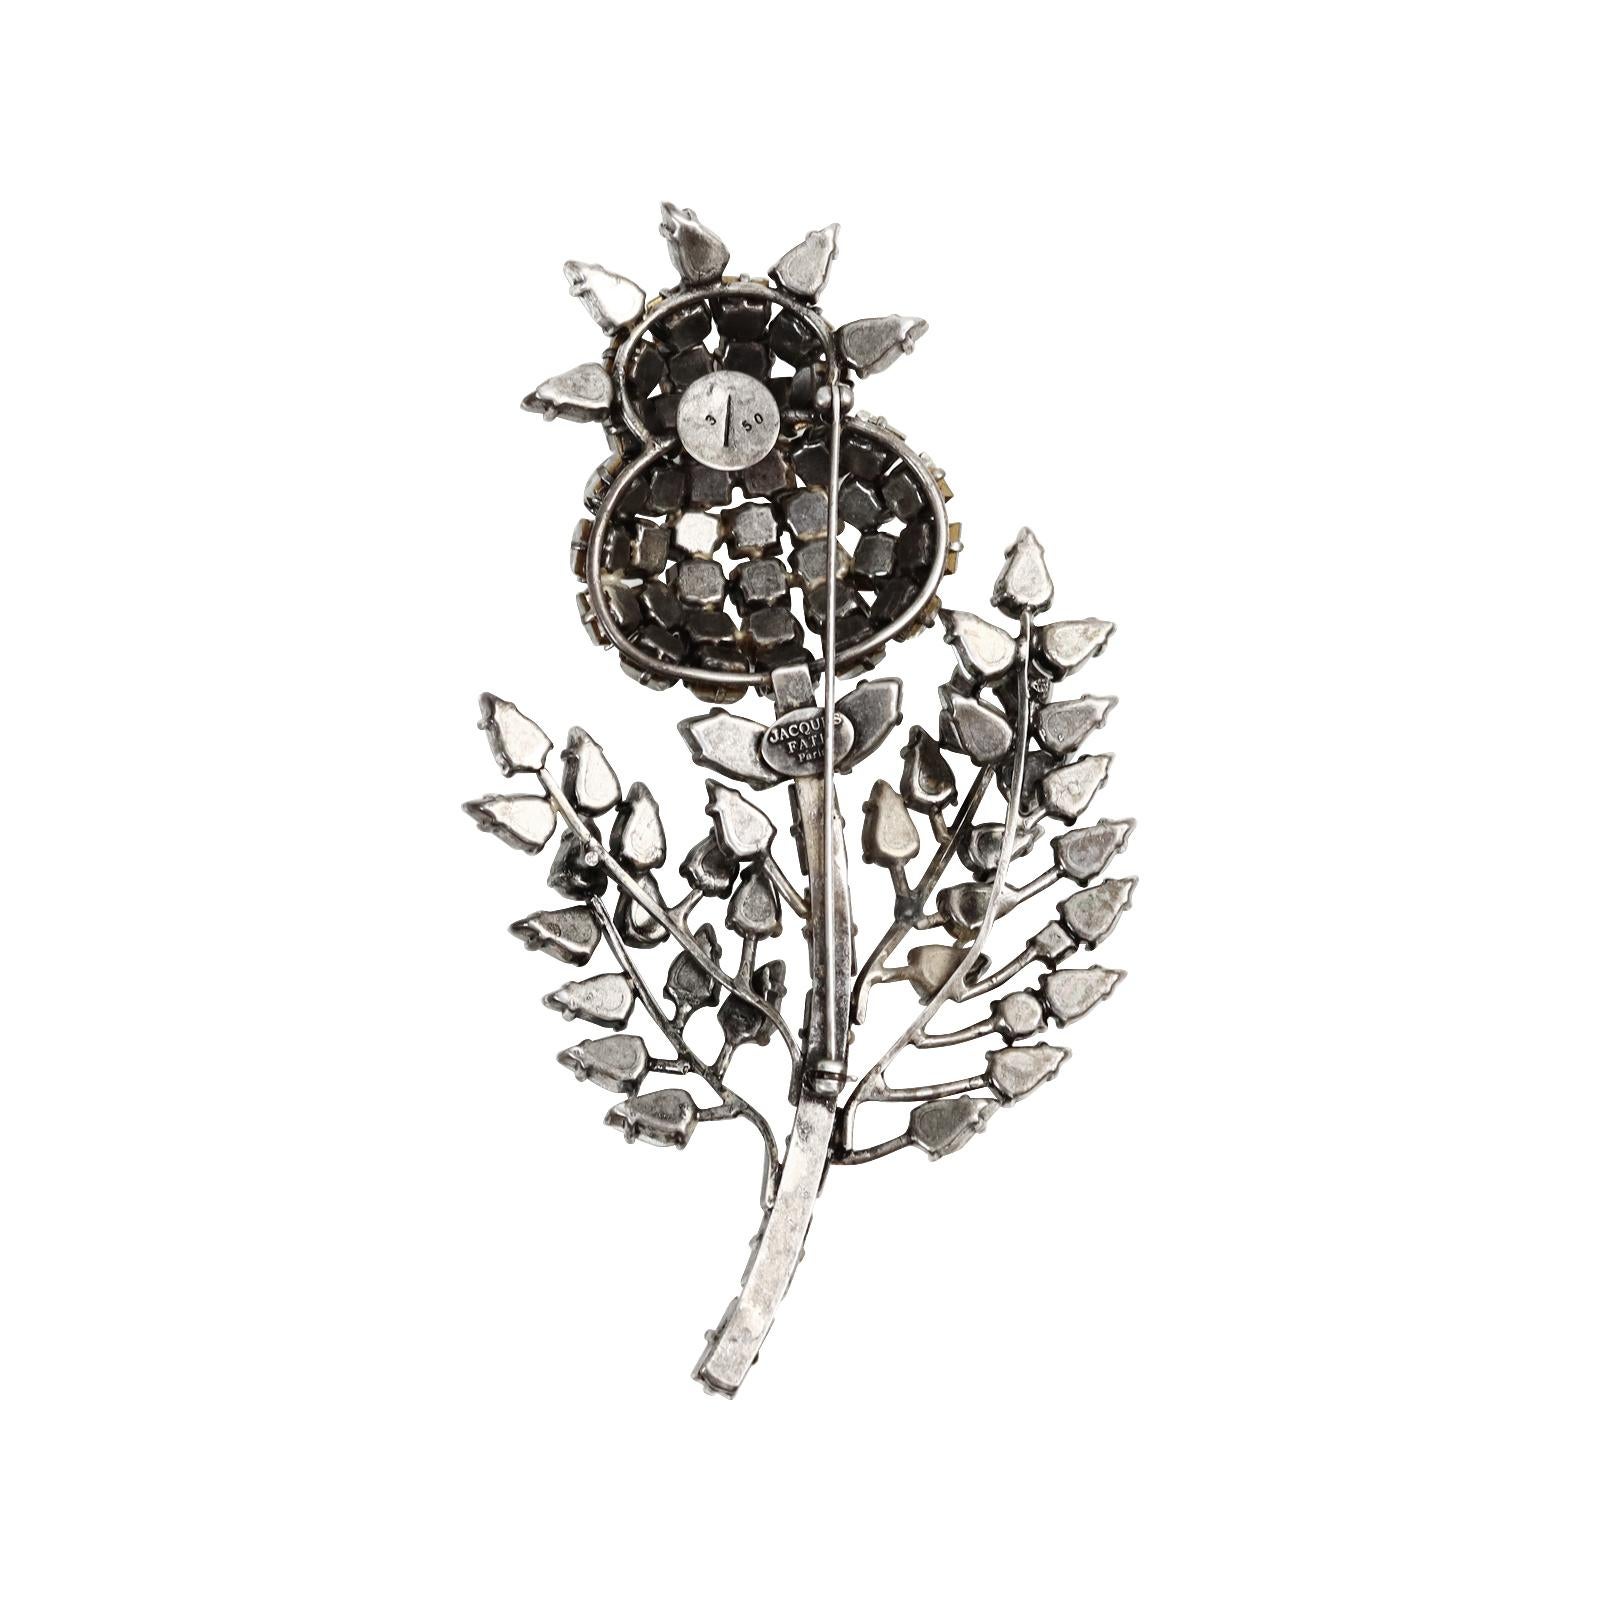 Collectible Jacques Fath Large Crystal Brooch Circa 2007 In Good Condition For Sale In New York, NY